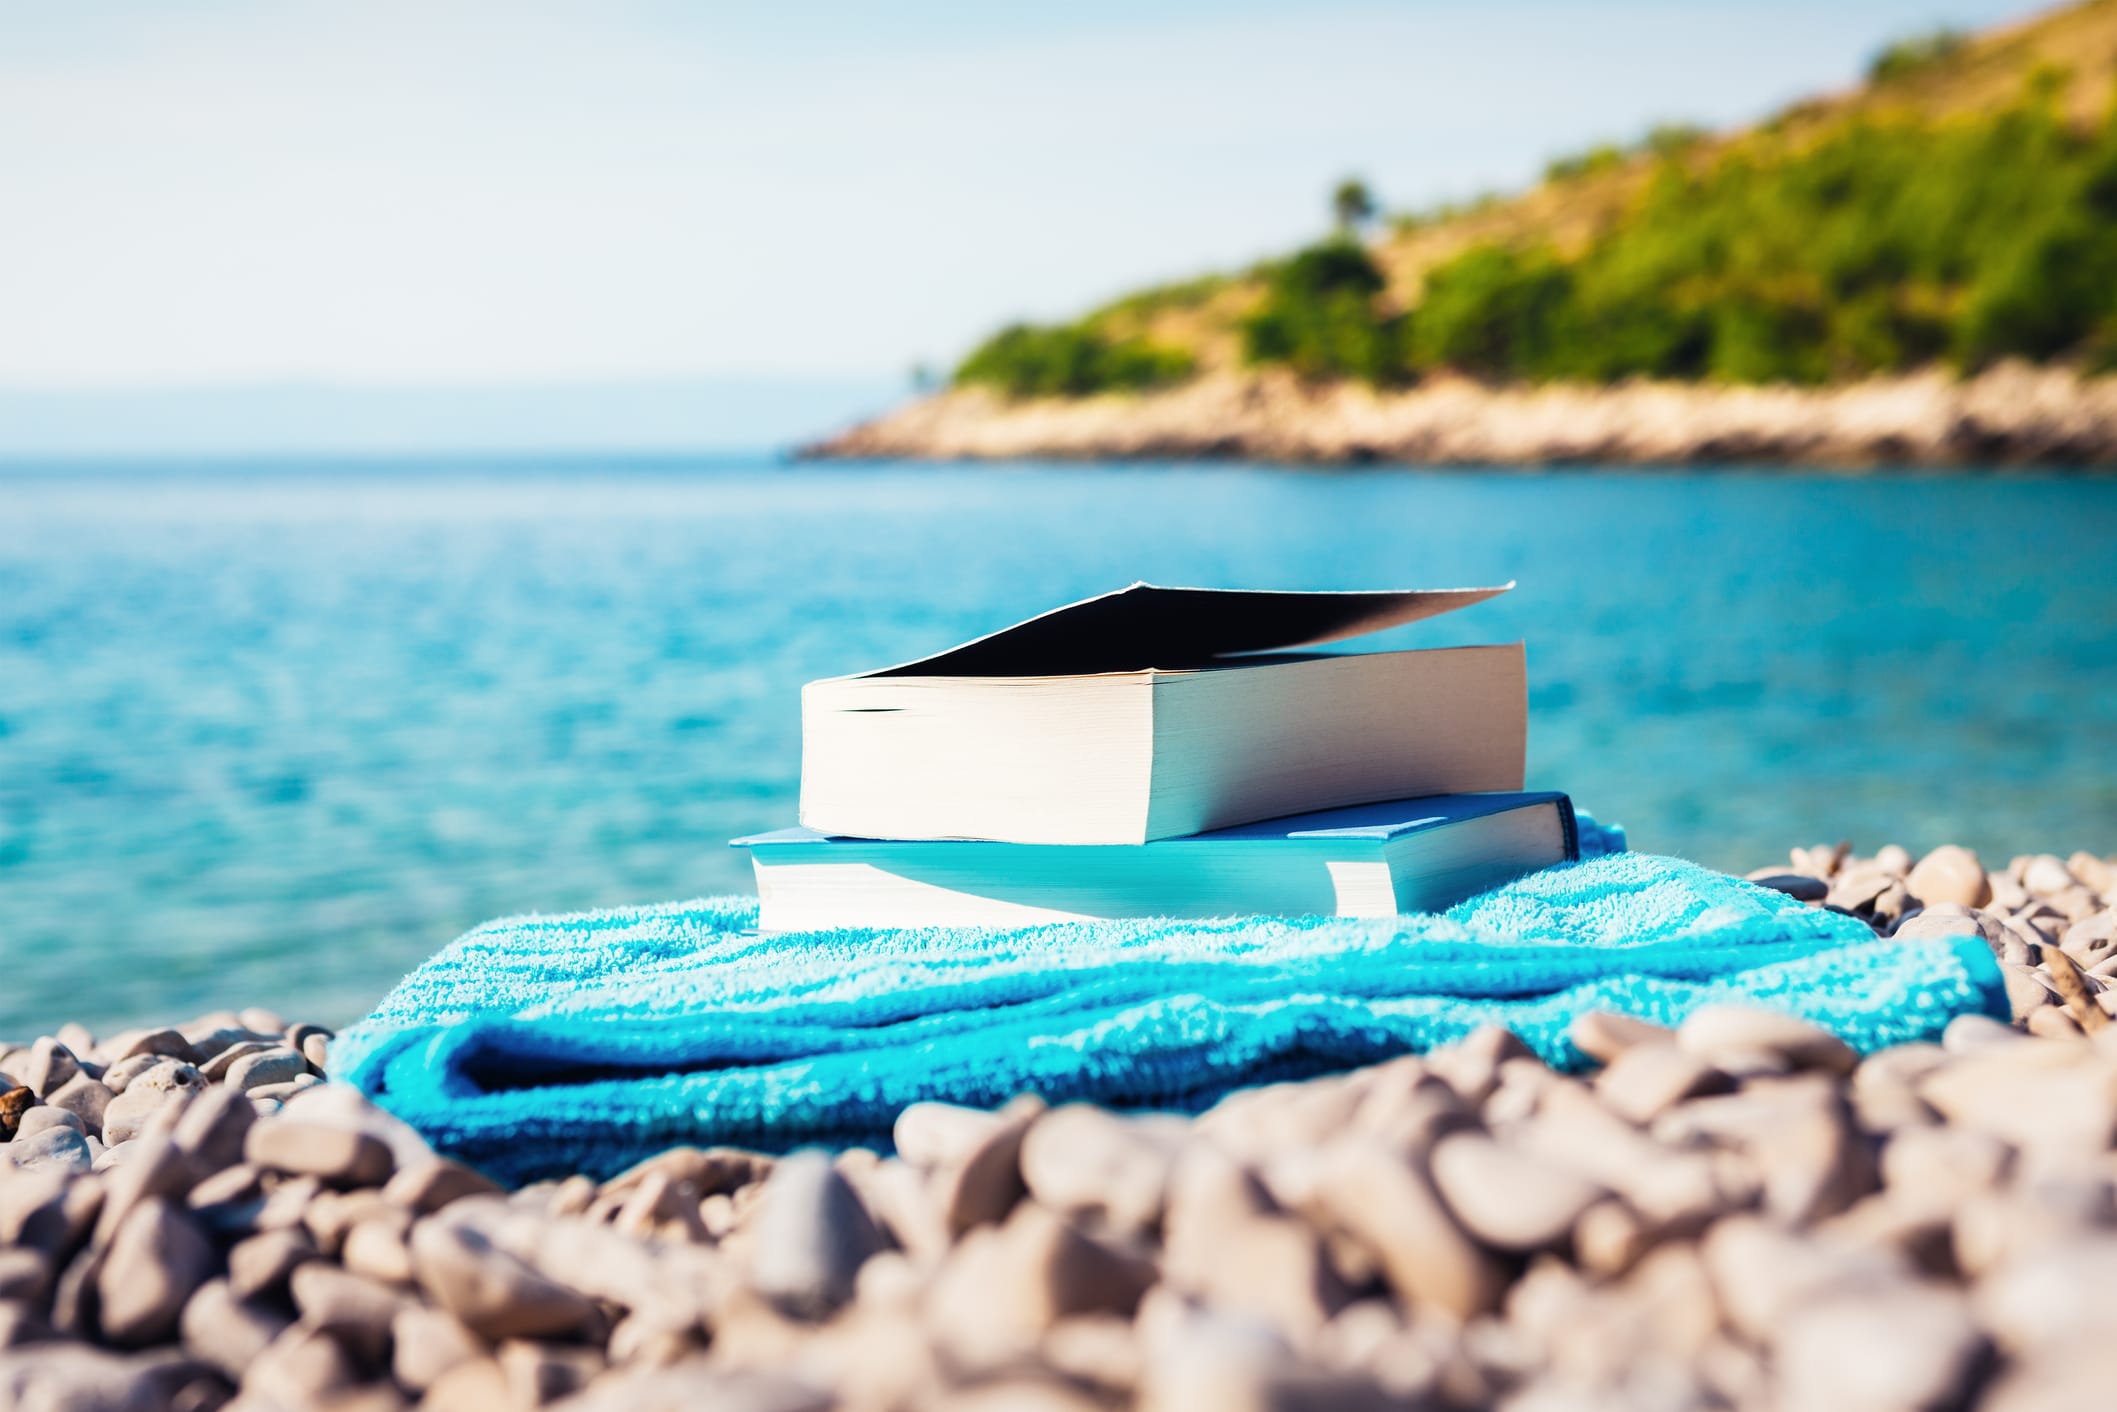 At a beach, two books sit on top of a blue towel on a rocky shore. The water is in the background, with trees blurred in thee distance.